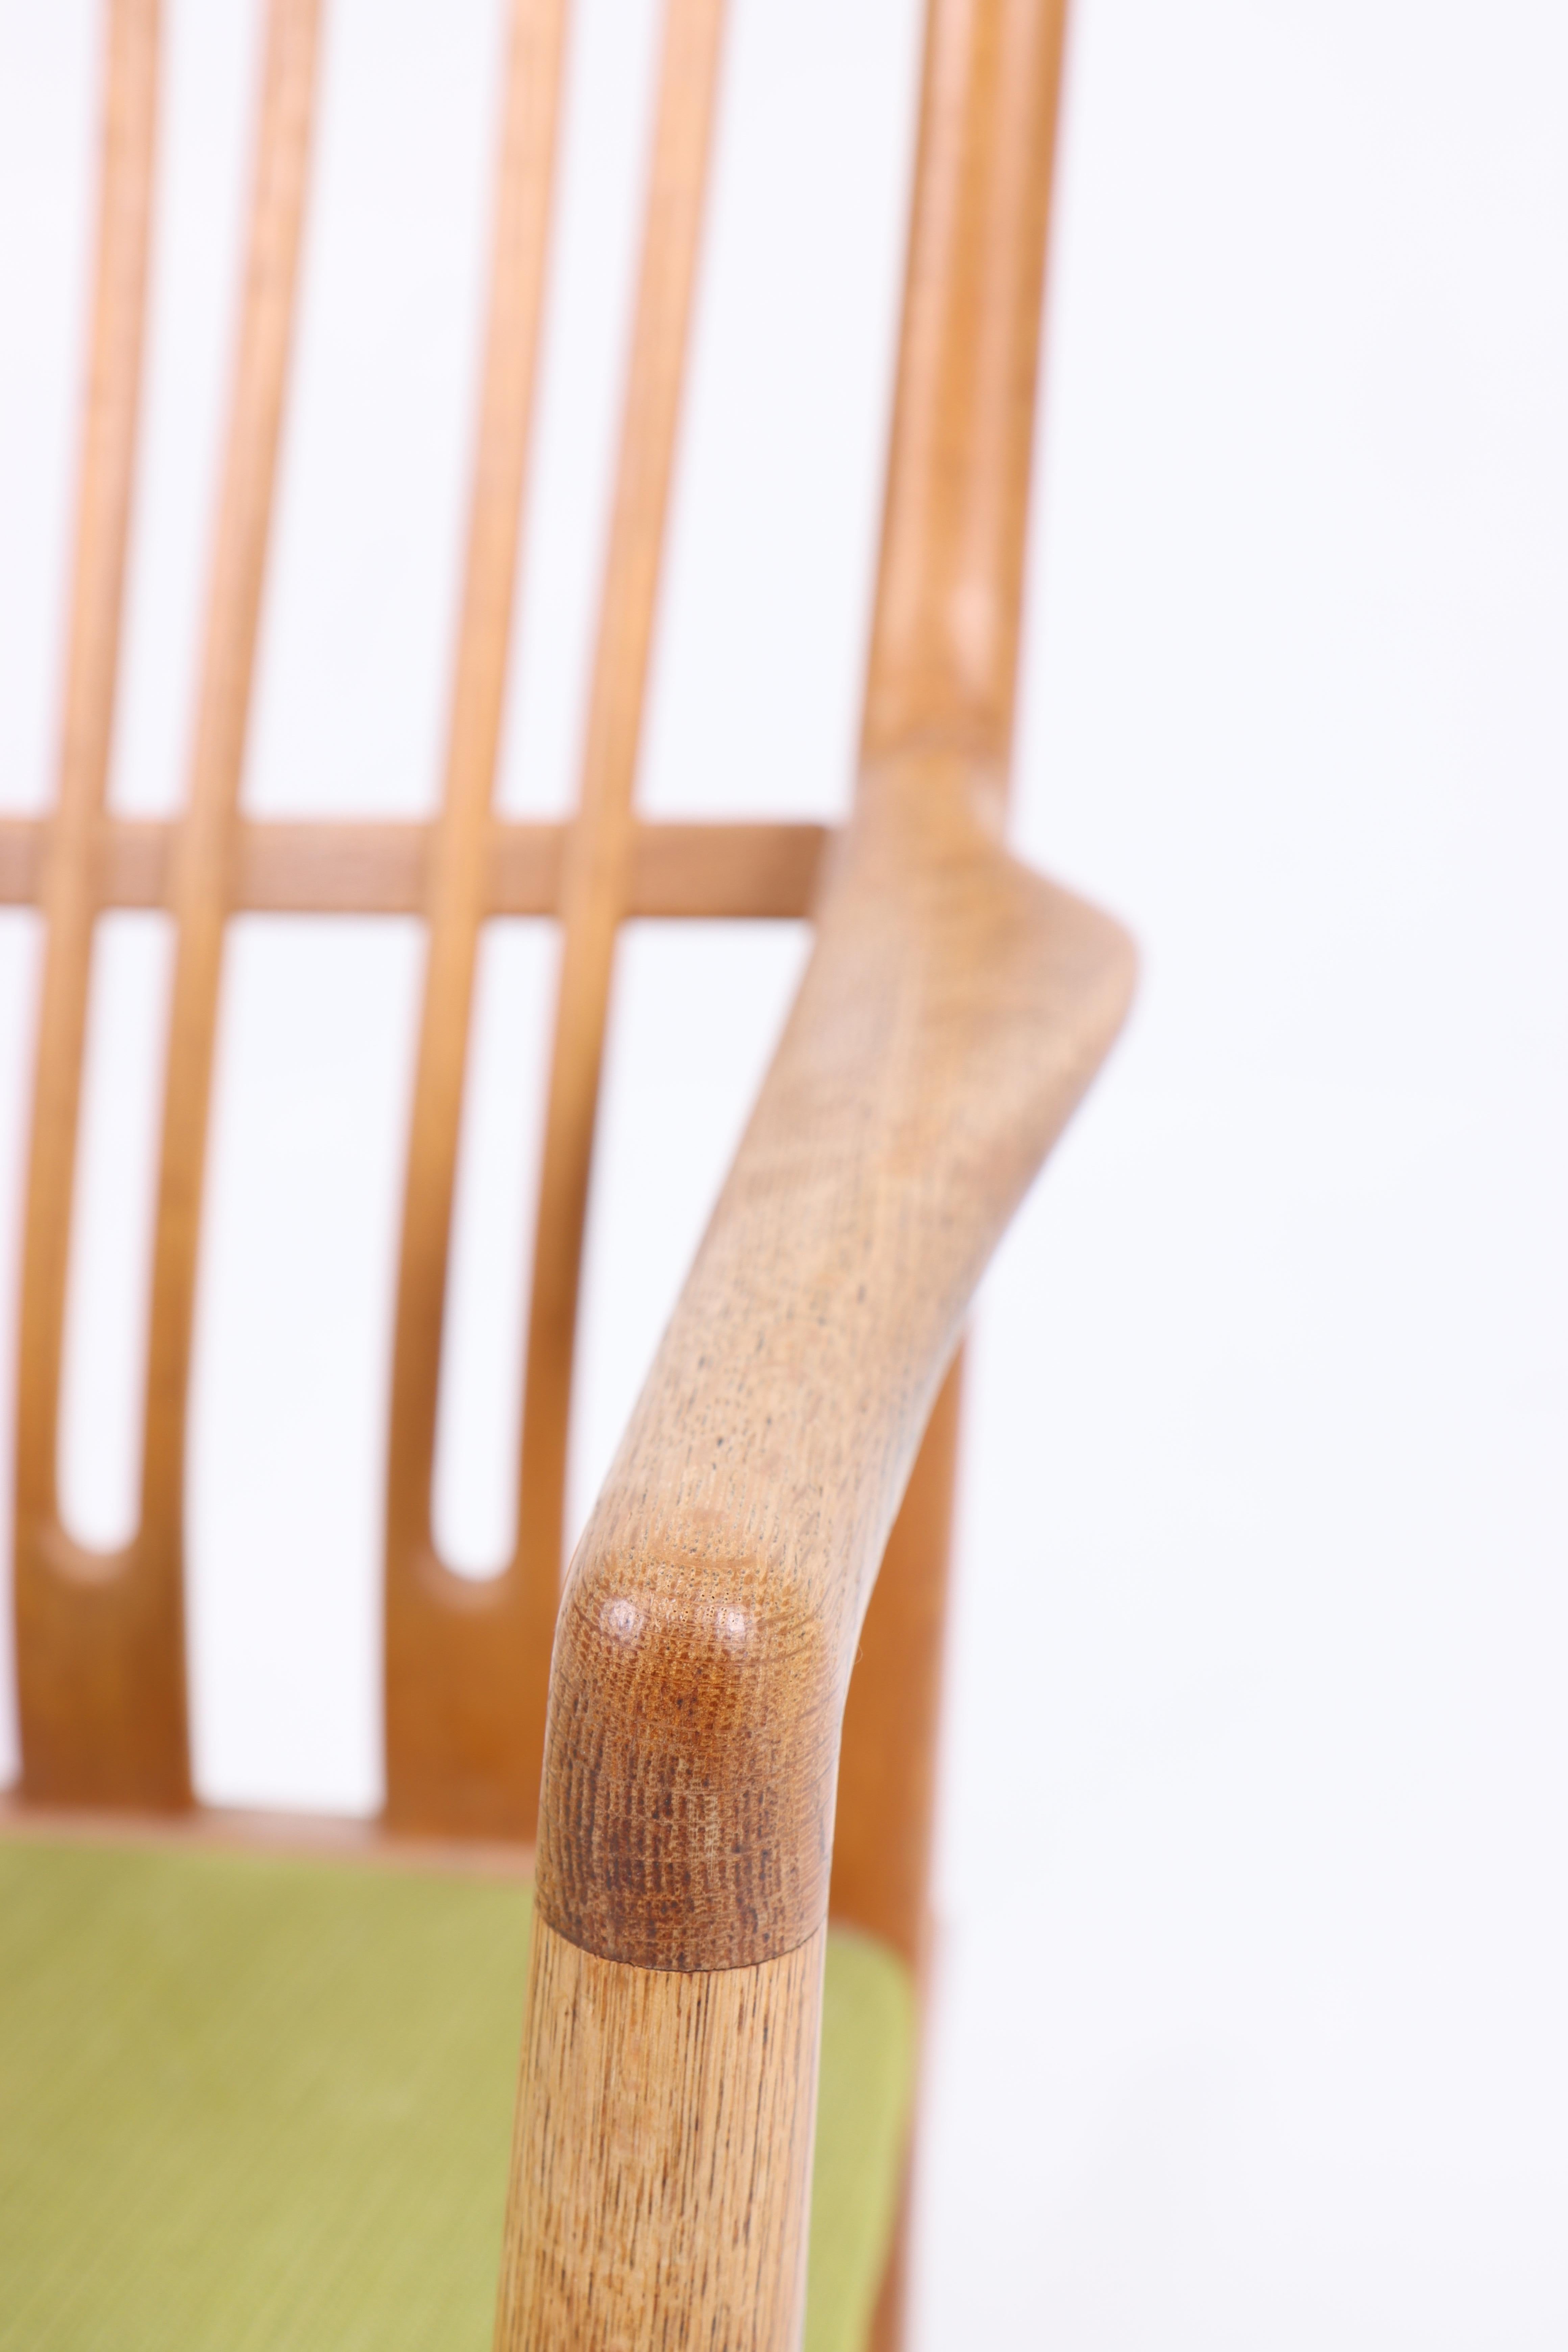 Mid-20th Century Rocking Chair in Oak by Hans Wegner, 1950s For Sale